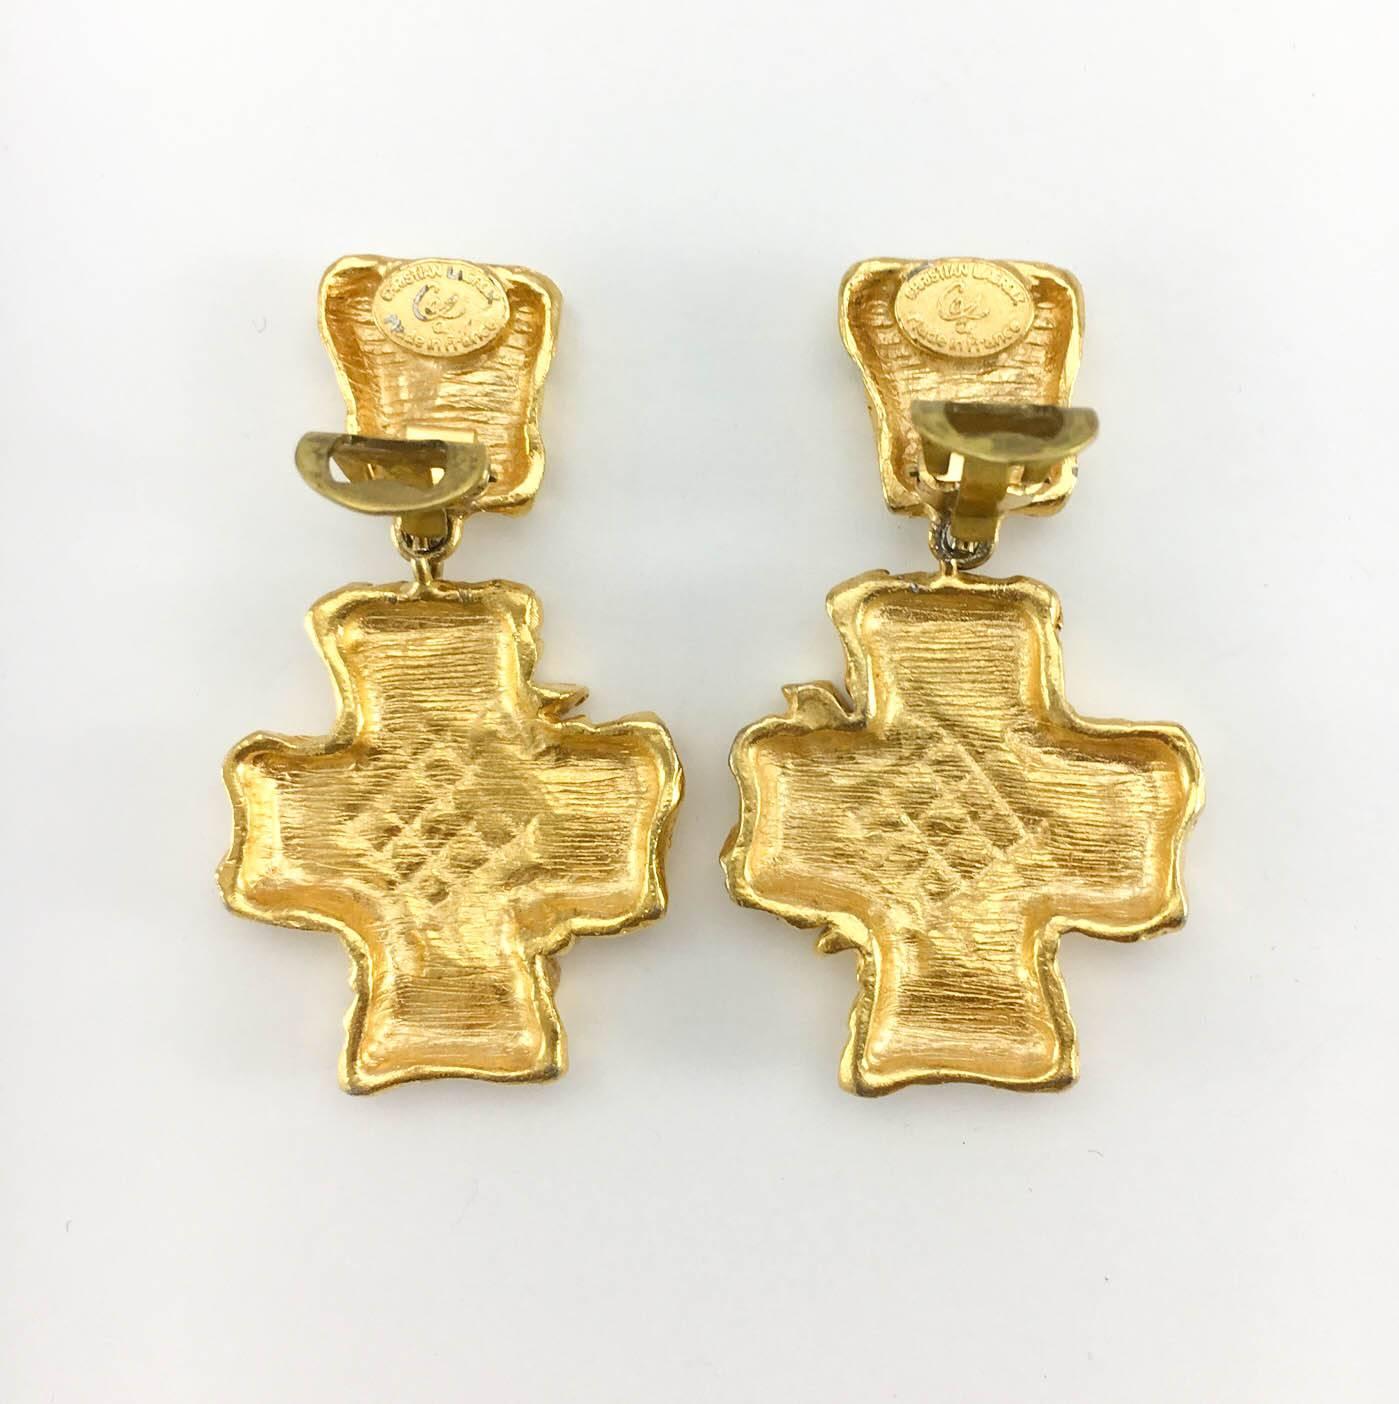 Lacroix Stylized Gold-Plated Cross, by Goossens - 1980s 5